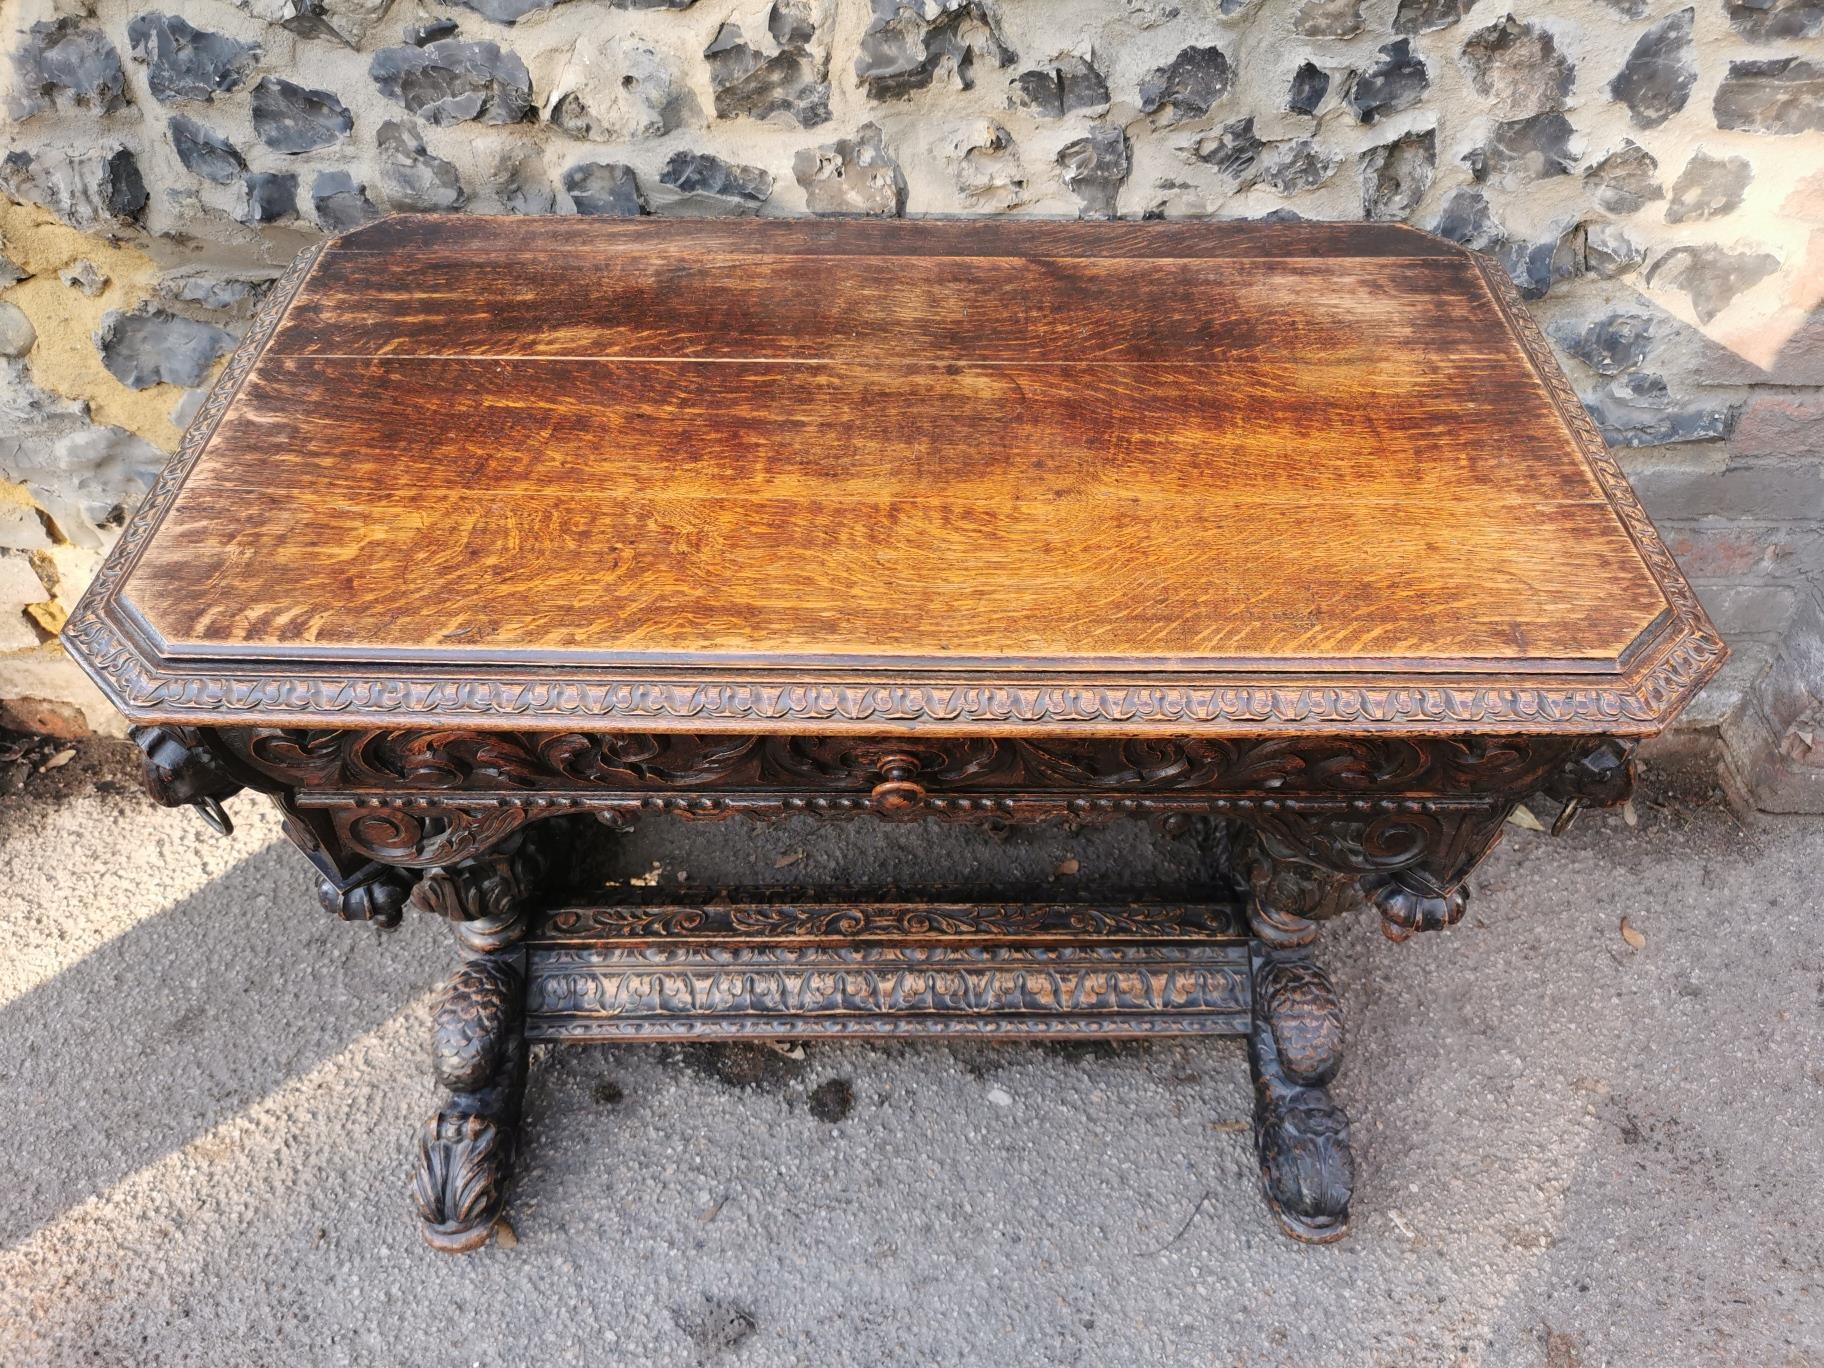 A 19th century Renaissance style carved oak library table, possibly French, with carved dolphin - Image 2 of 7